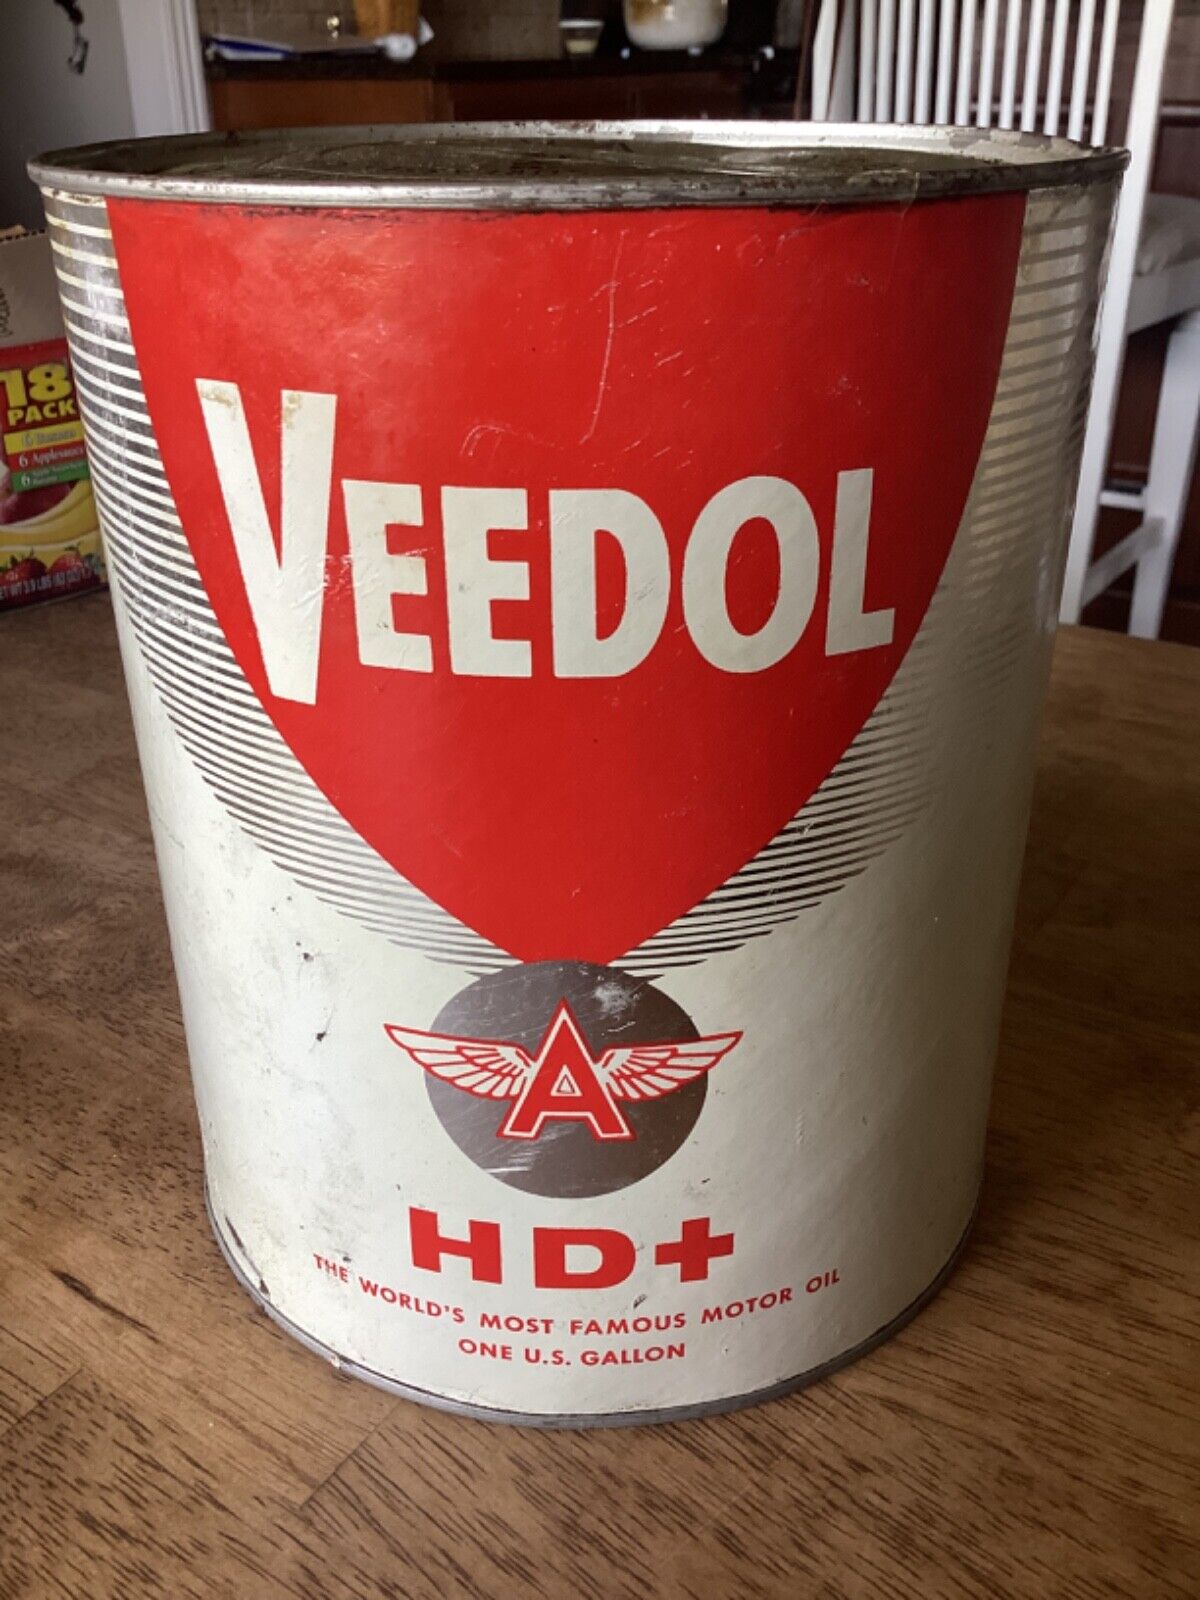 Veedol Flying A HD+ Motor Oil Composite Can 1 Gallon Empty